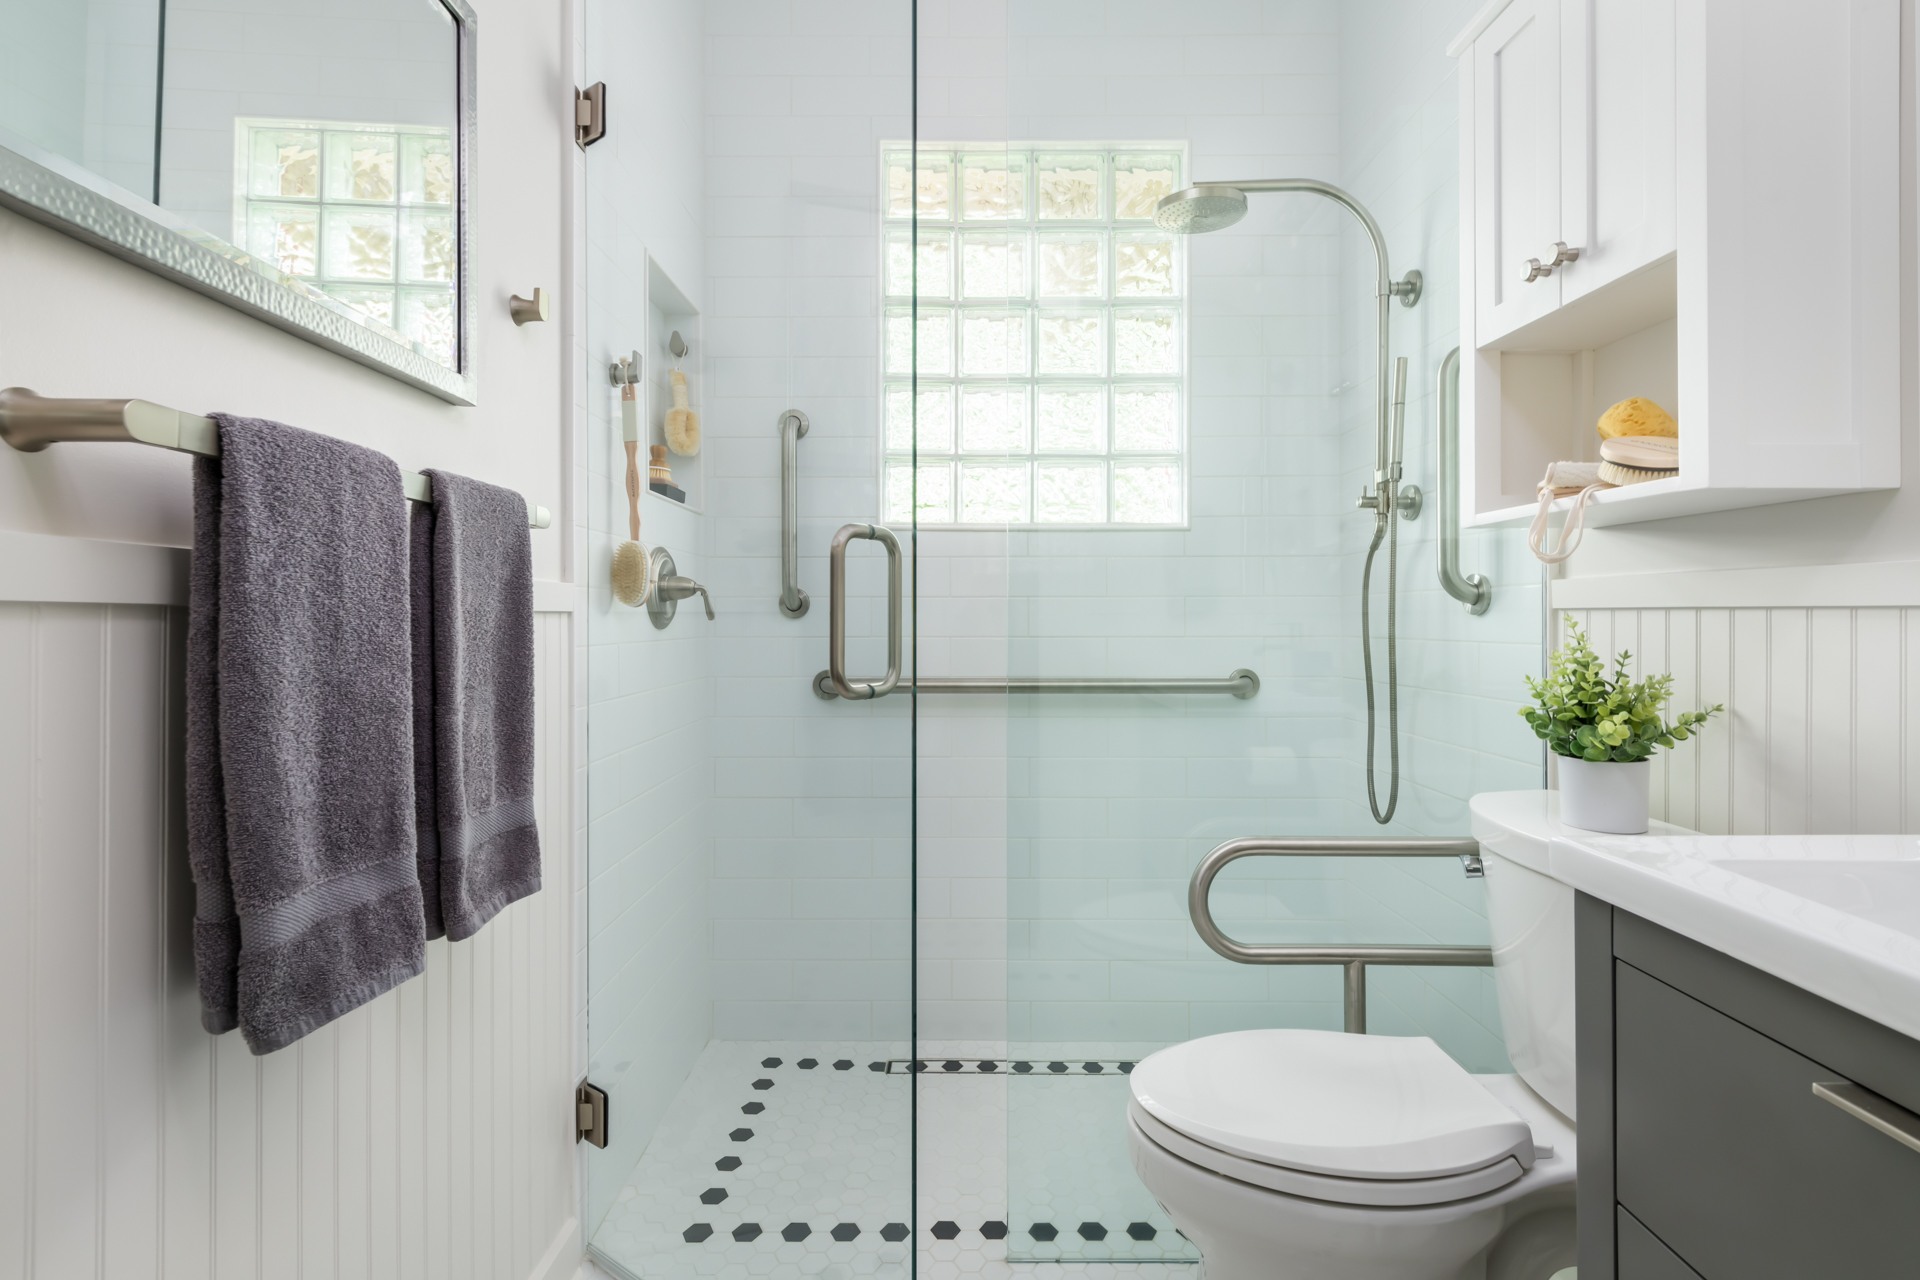 5 Top Home Renovation Upgrades age in place bathroom